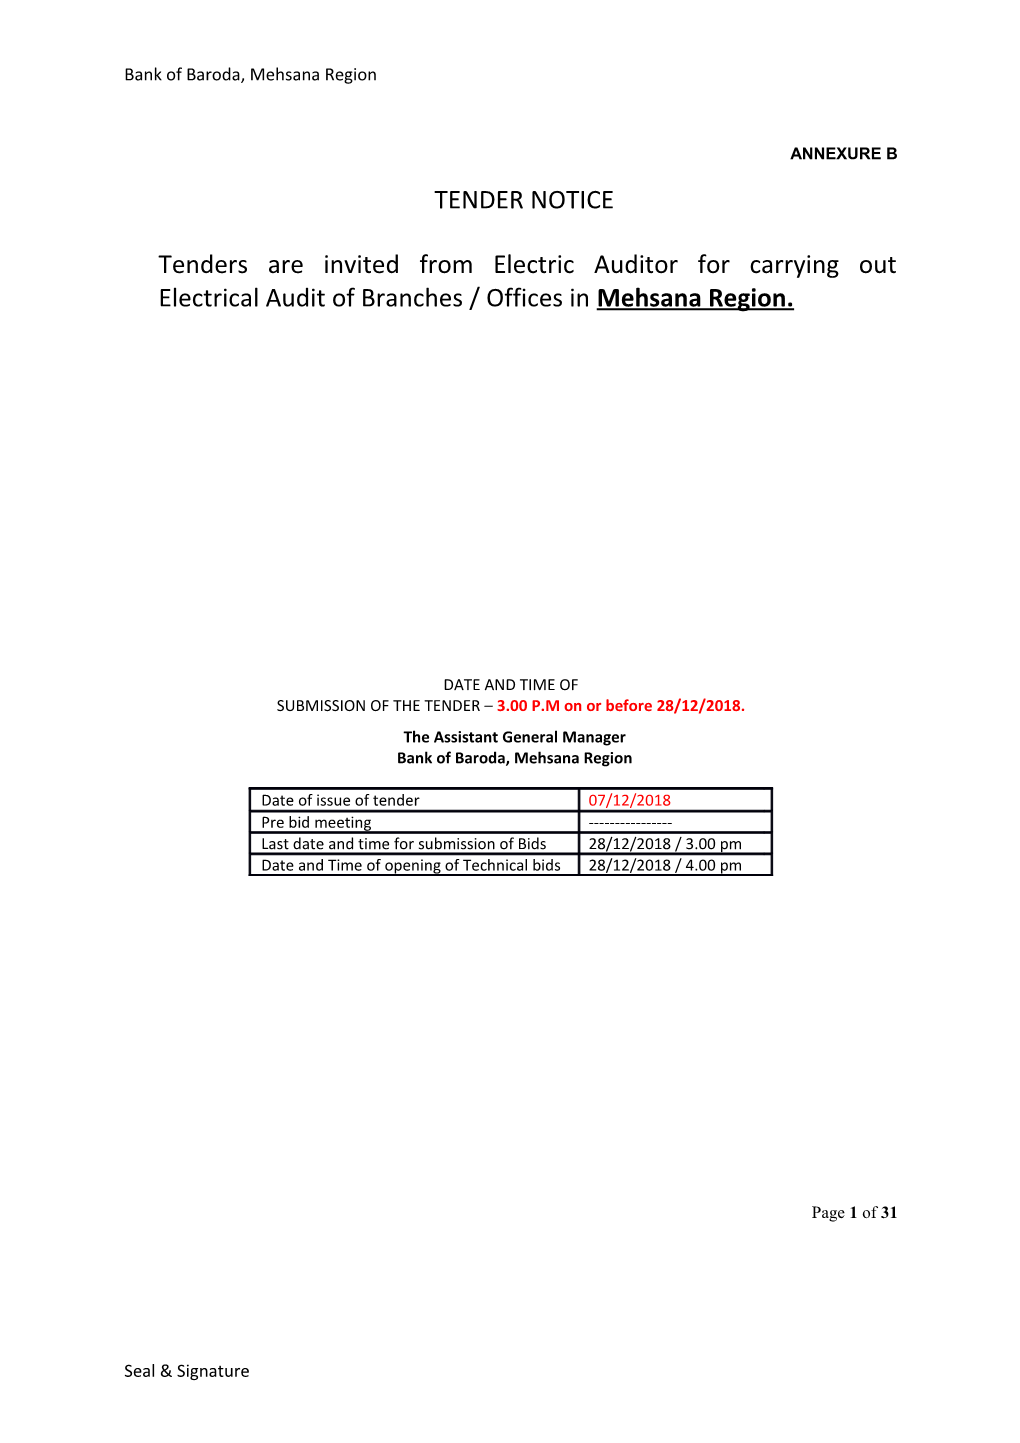 TENDER NOTICE Tenders Are Invited from Electric Auditor for Carrying Out